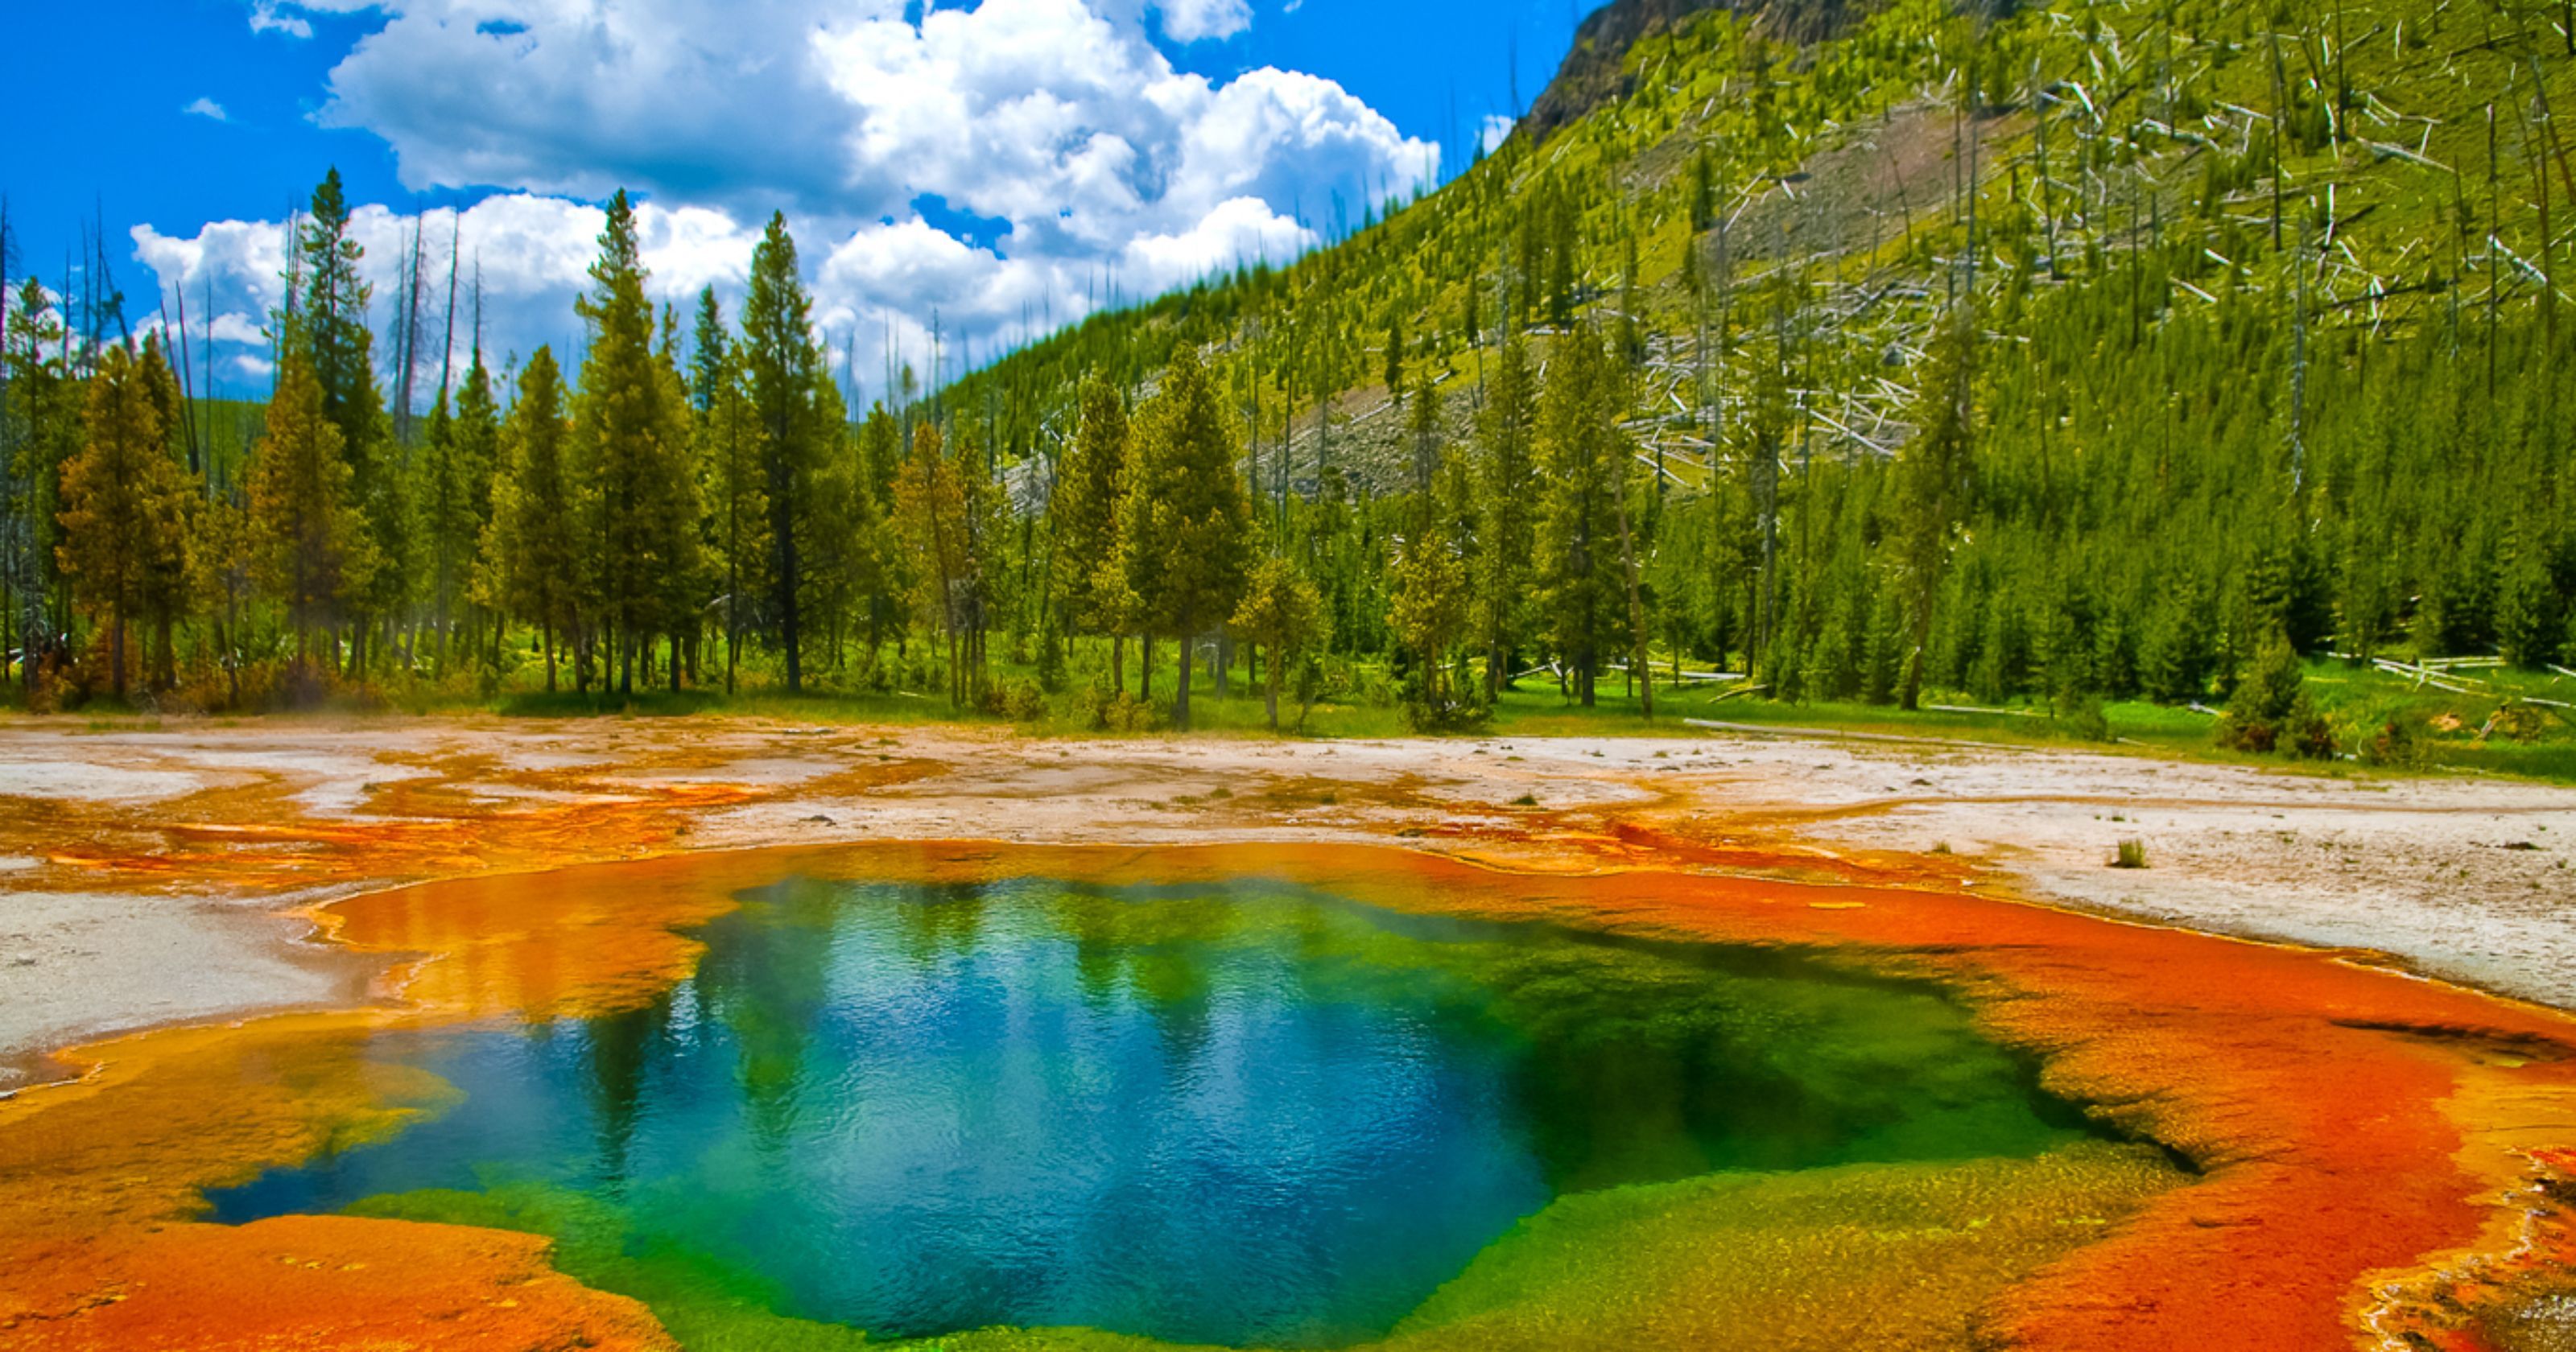 Yellowstone's heat may be coming from deeper underground than thought